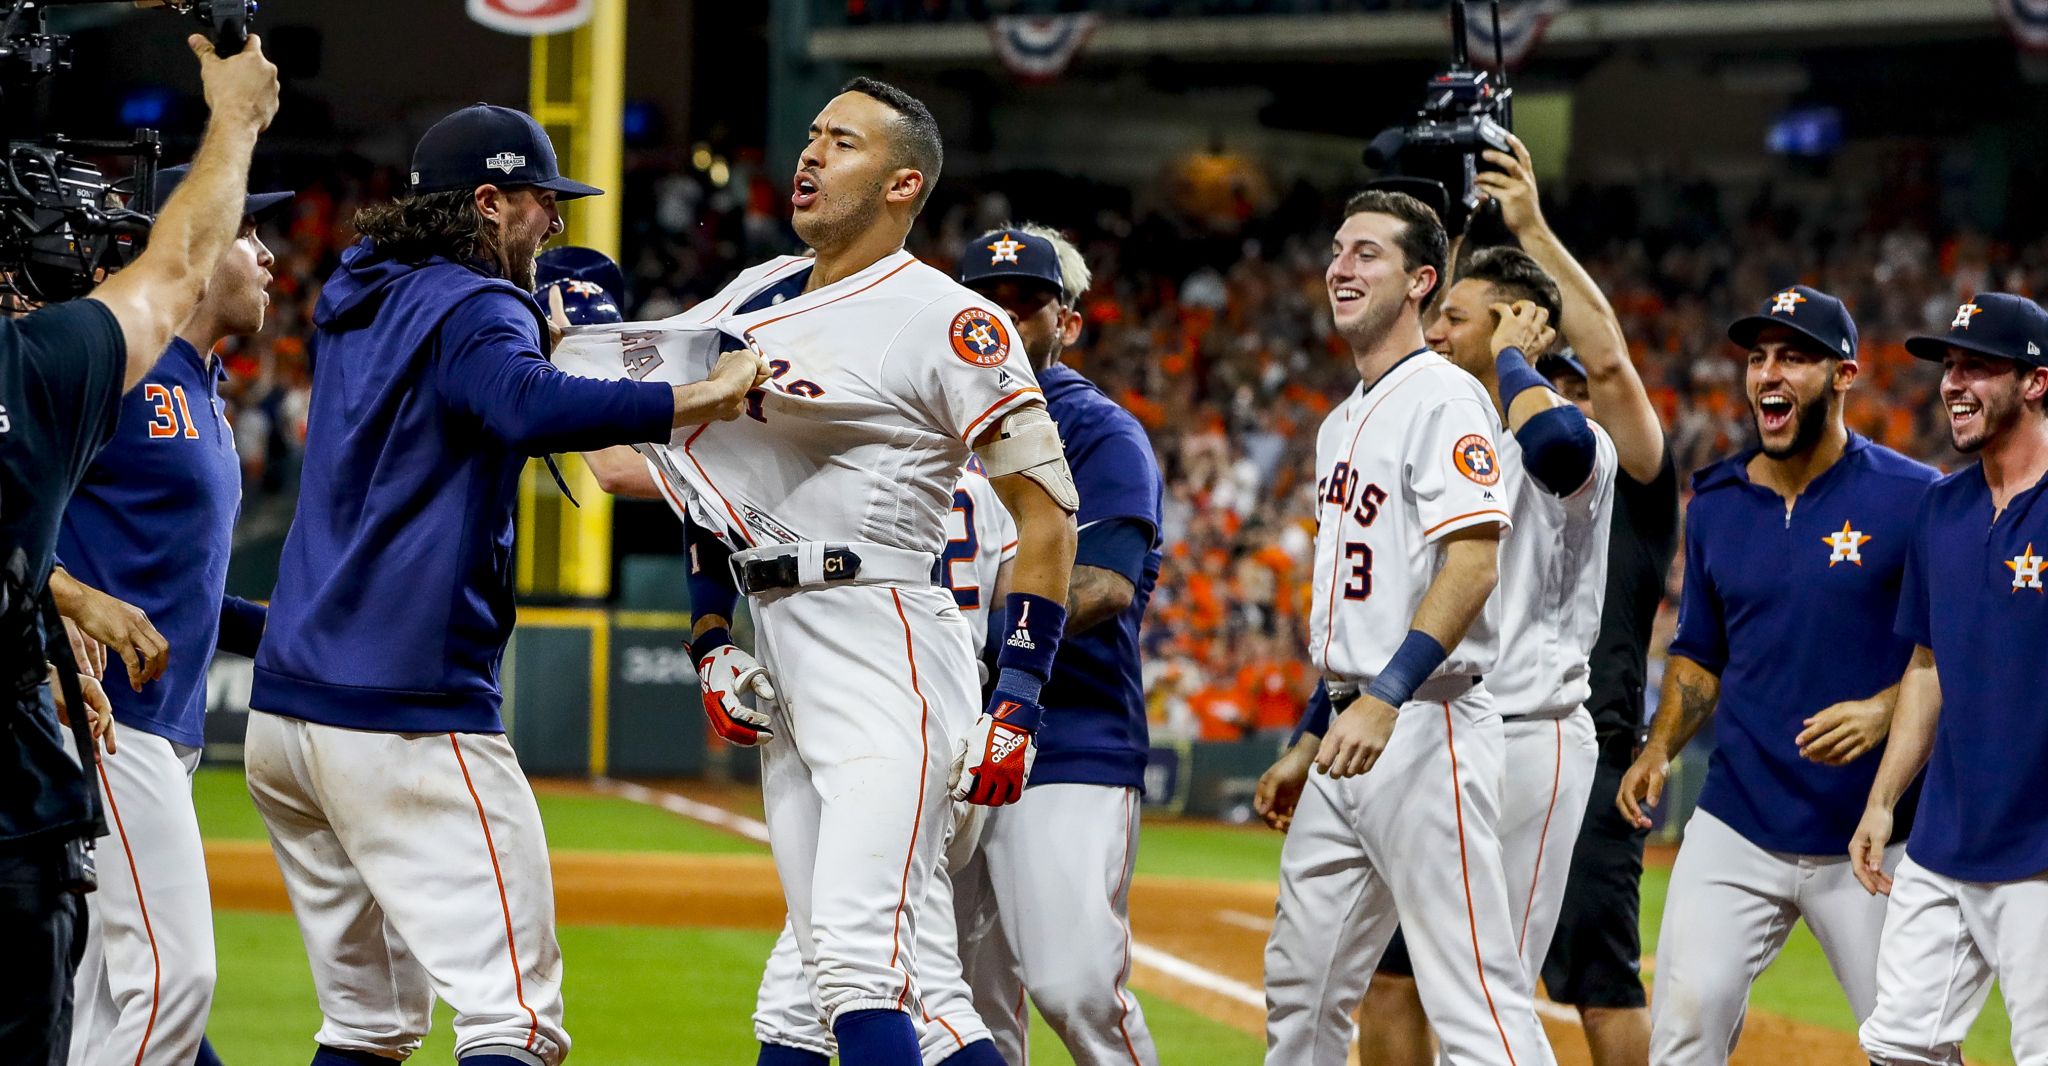 How the Astros delivered in a must-win game vs. Yankees